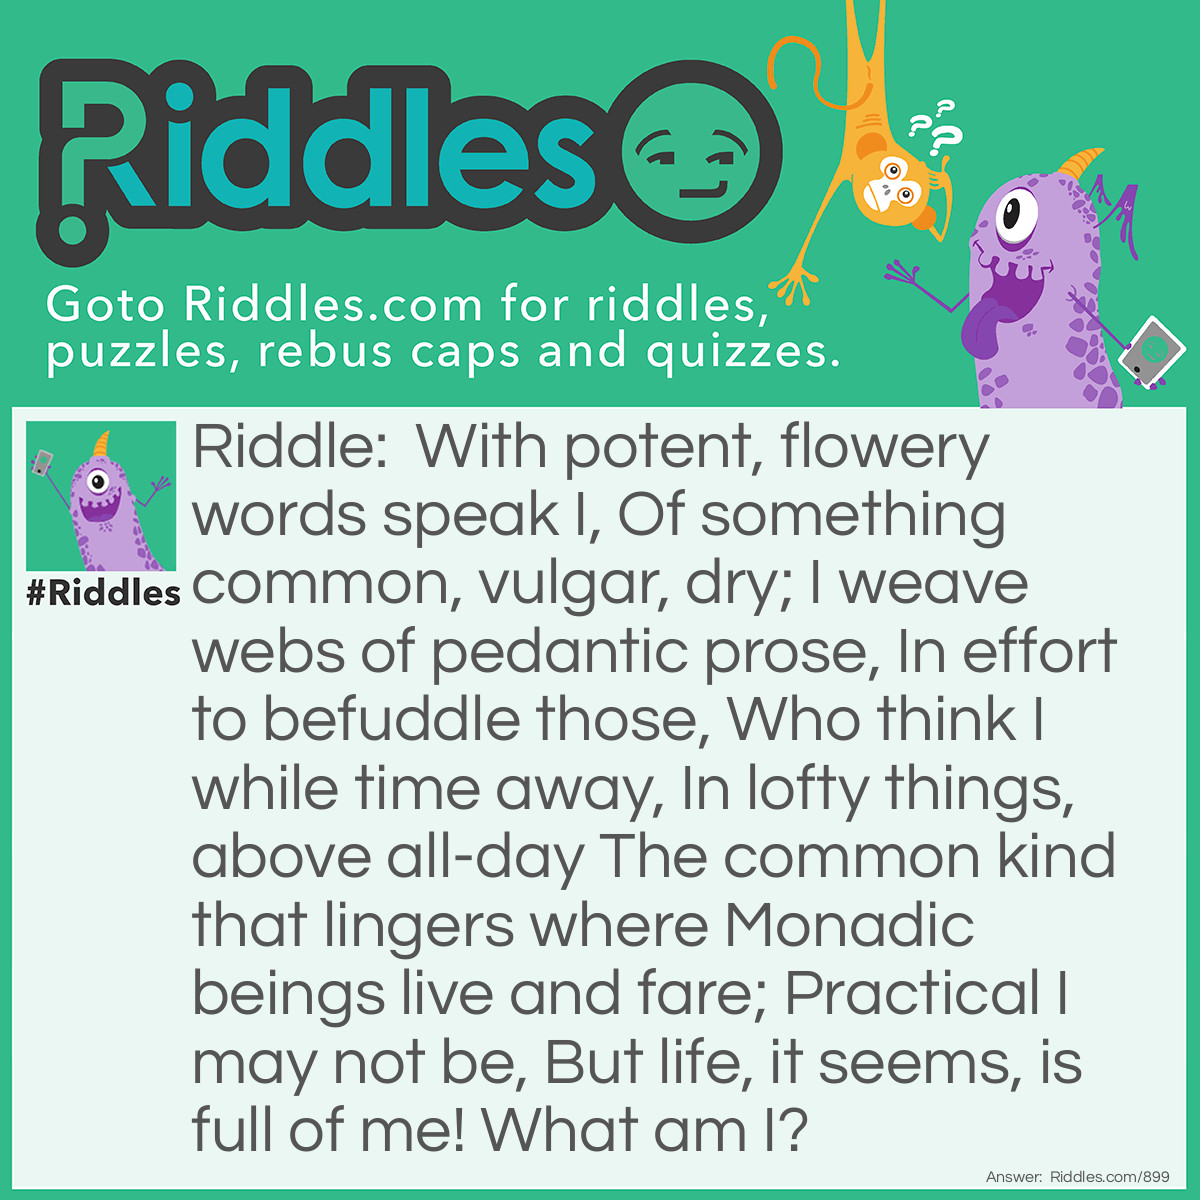 Riddle: With potent, flowery words speak I, Of something common, vulgar, dry; I weave webs of pedantic prose, In effort to befuddle those, Who think I while time away, In lofty things, above all-day The common kind that lingers where Monadic beings live and fare; Practical I may not be, But life, it seems, is full of me! What am I? Answer: A riddler. ( or riddle )